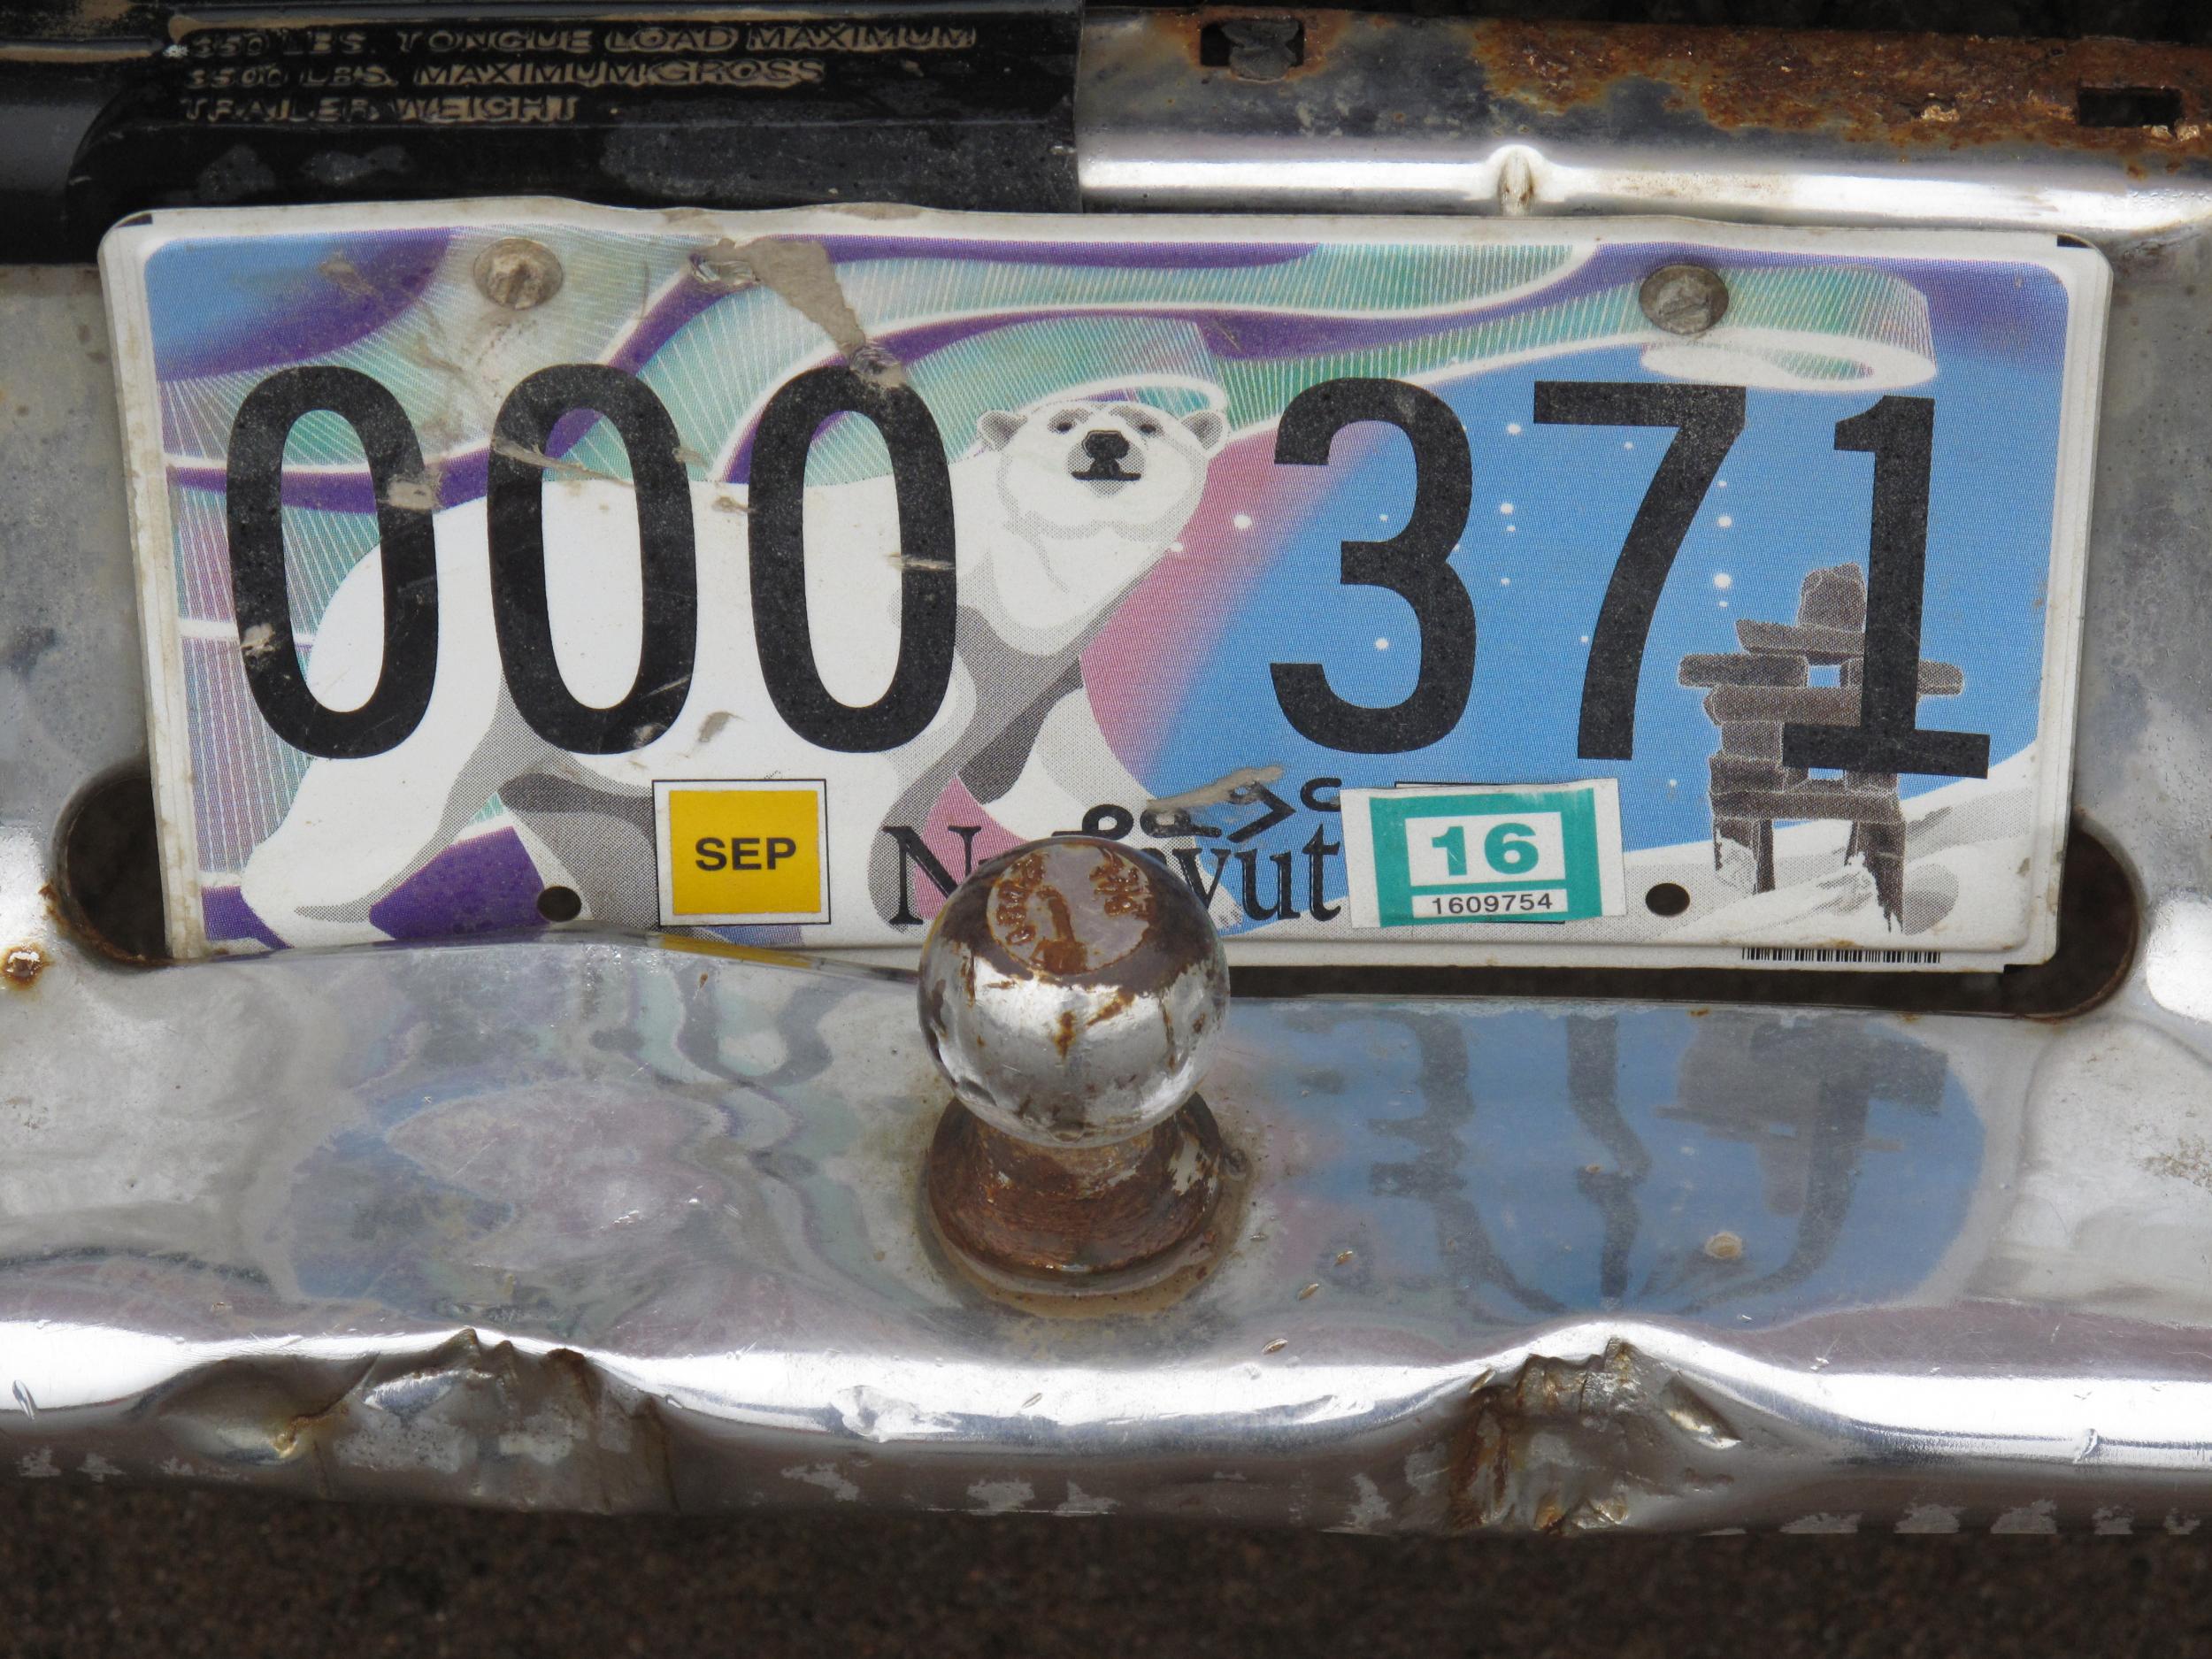 Polar flair: a number plate in Iqaluit, capital of the Canadian province of Nunavut